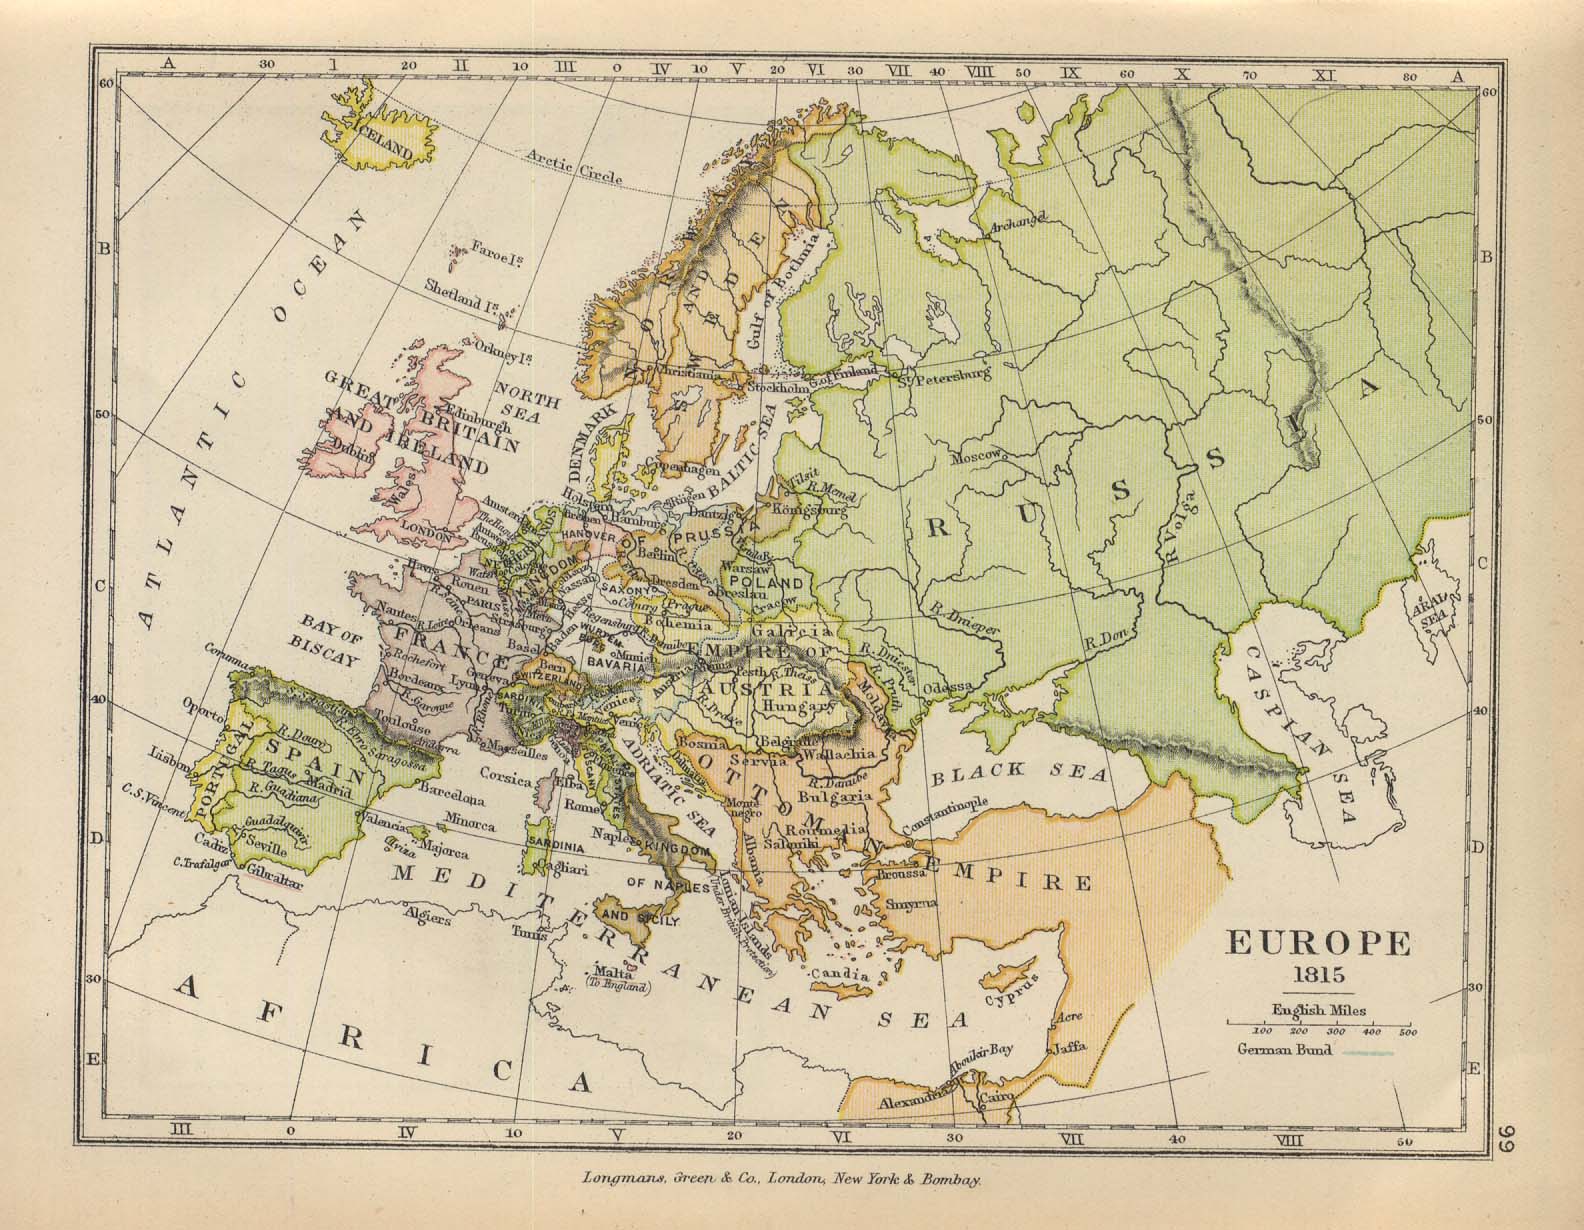 Europe Historical Maps Perry Castaneda Map Collection Ut